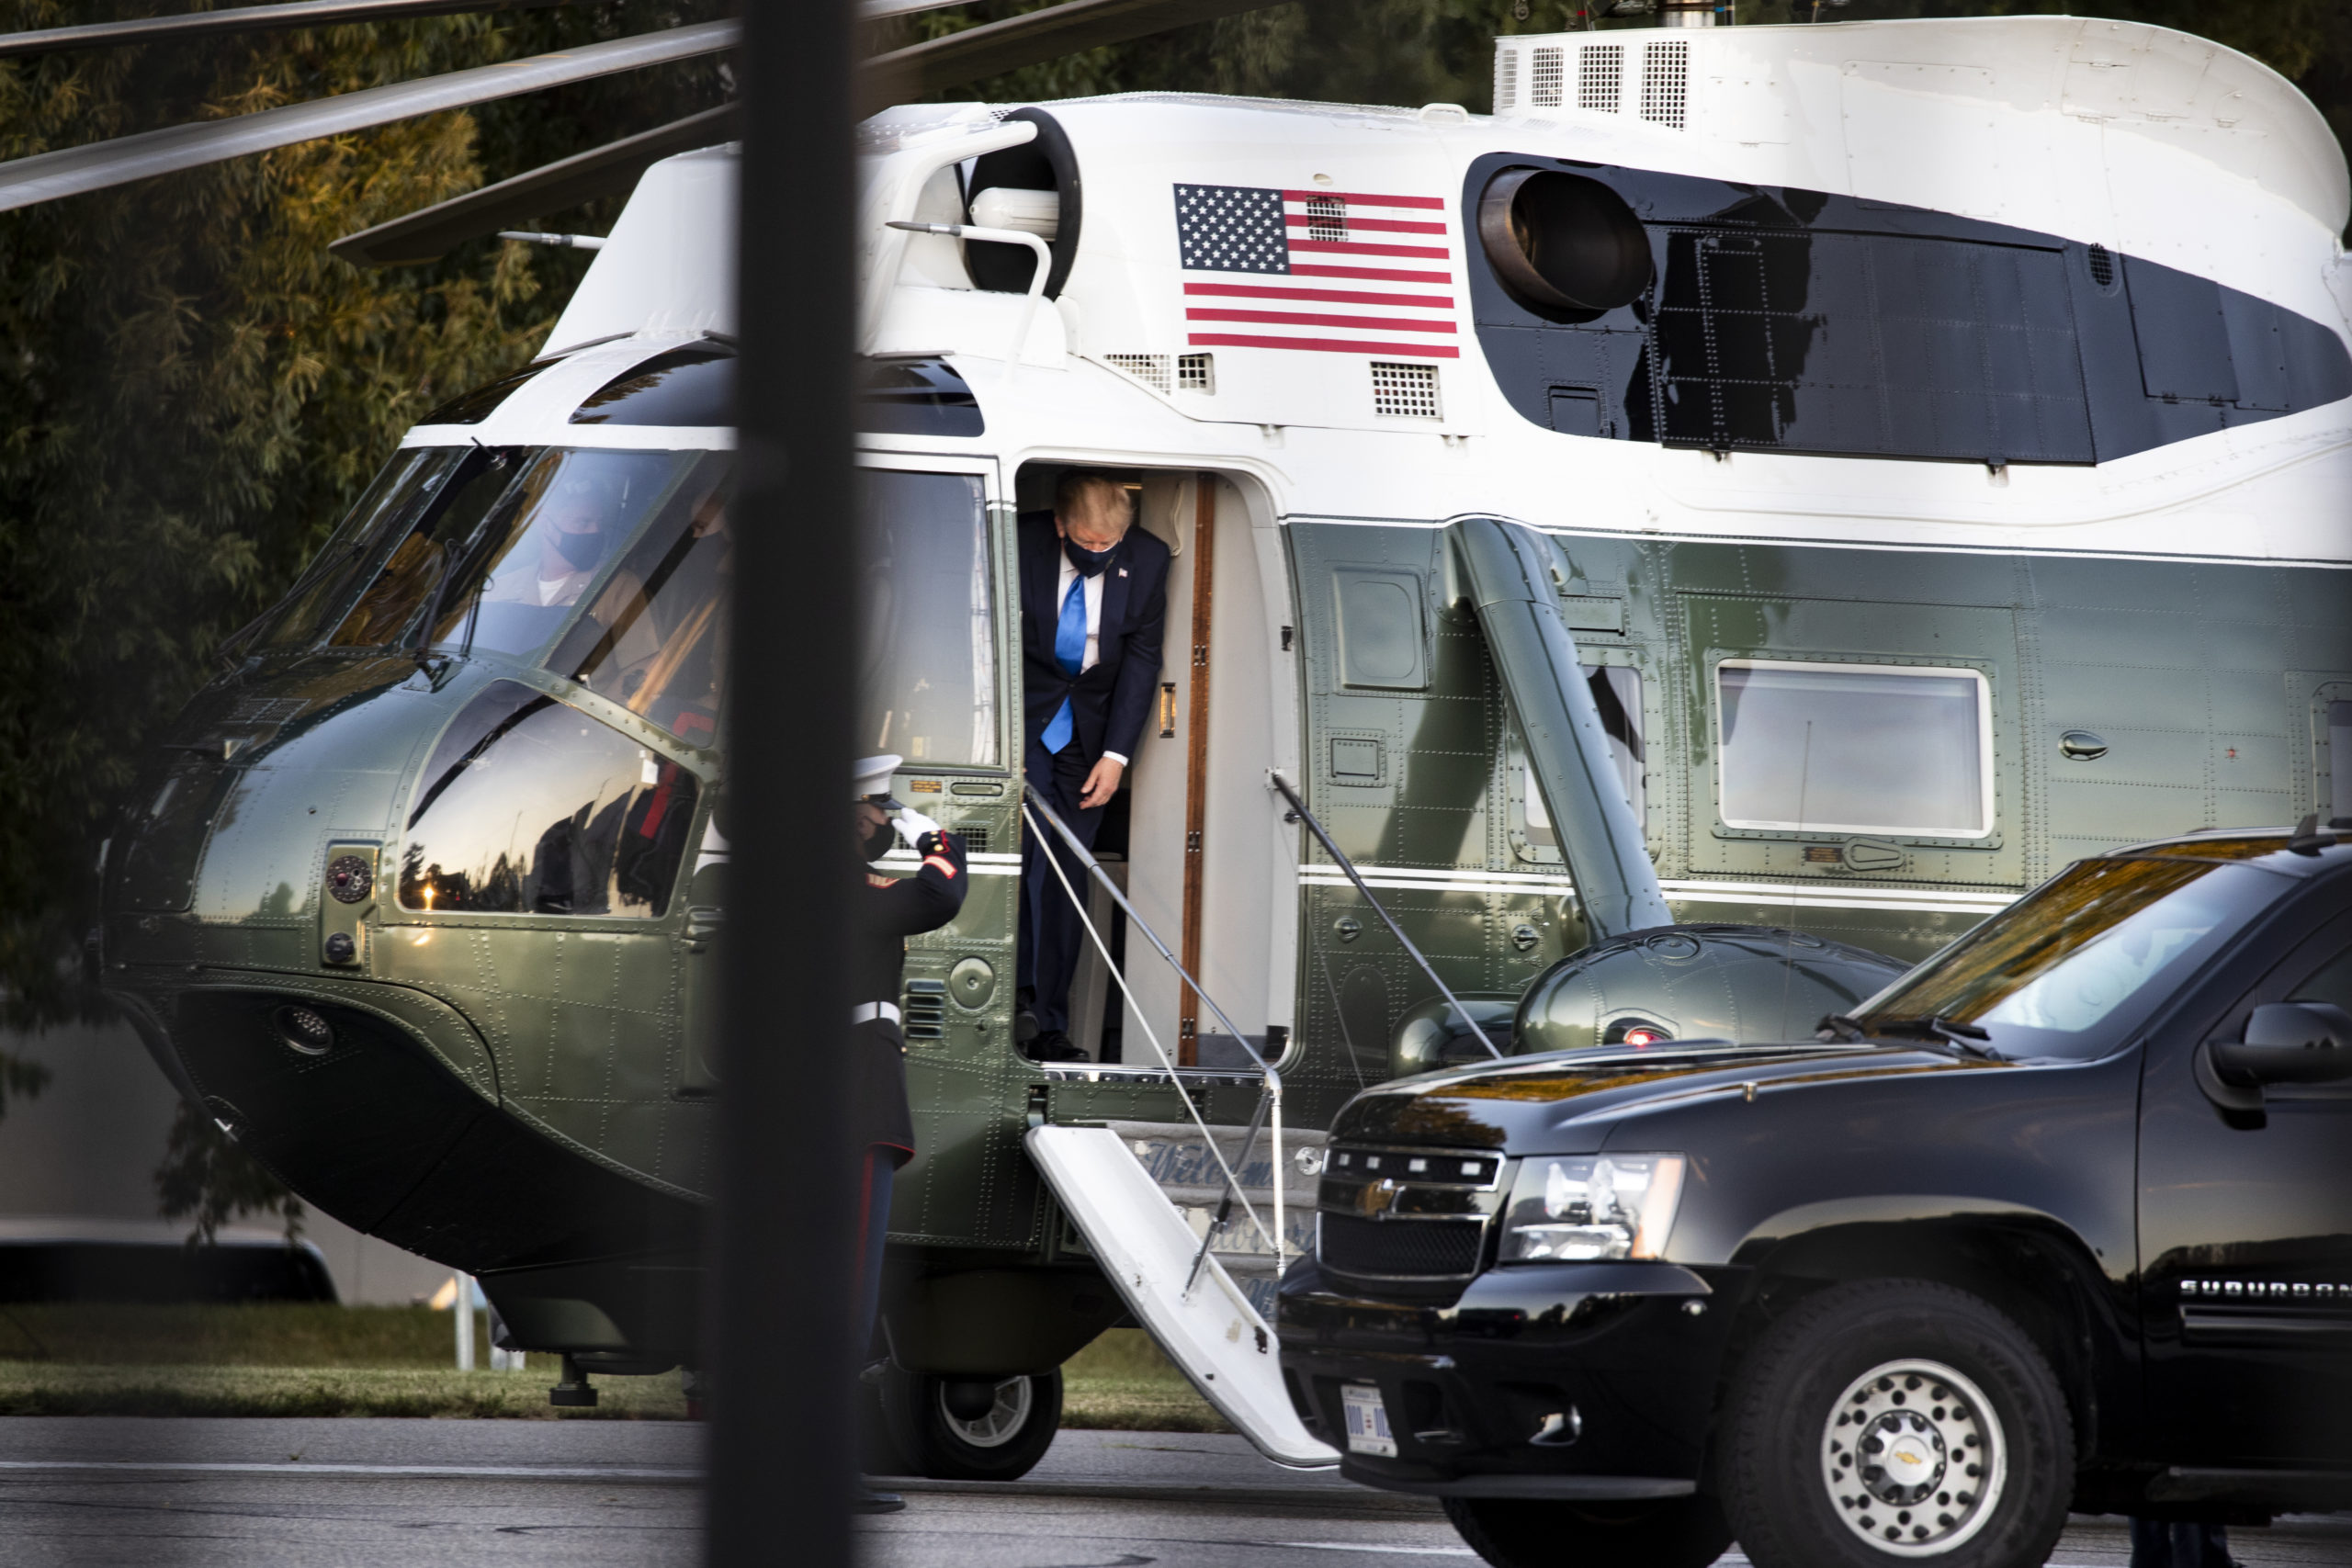 WASHINGTON, DC - OCTOBER 02: U.S. President Donald Trump exits Marine One at Walter Reed National Military Medical Center on October 2, 2020 in Bethesda, Maryland. Trump announced that he and First Lady Melania Trump tested positive for COVID-19 early this morning. The President is expected to stay at the hospital overnight. (Photo by Alex Edelman/Getty Images)